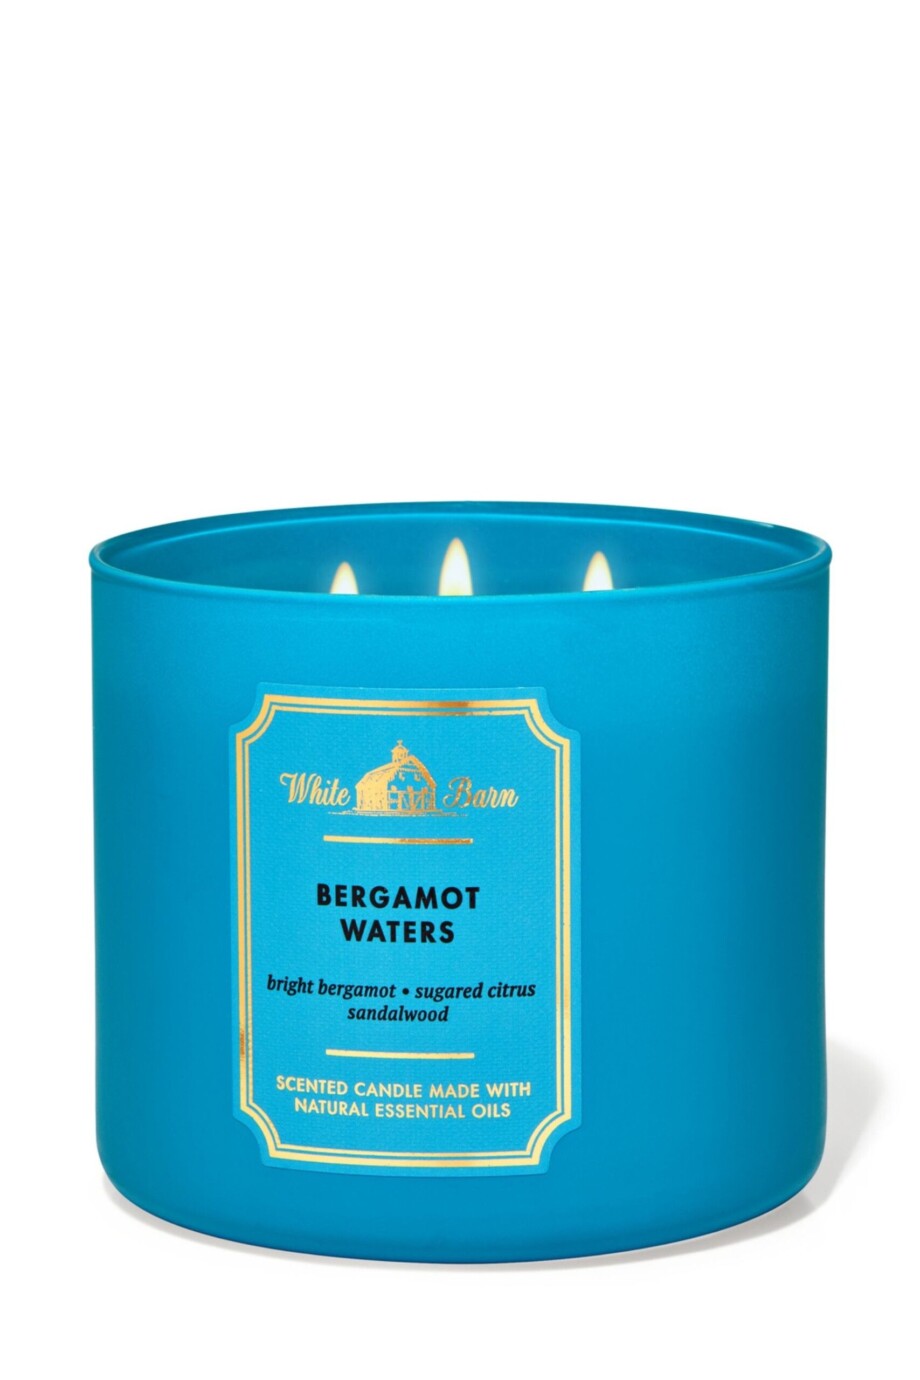 B&BW Bergamot Waters 3-Wick Scented Candle